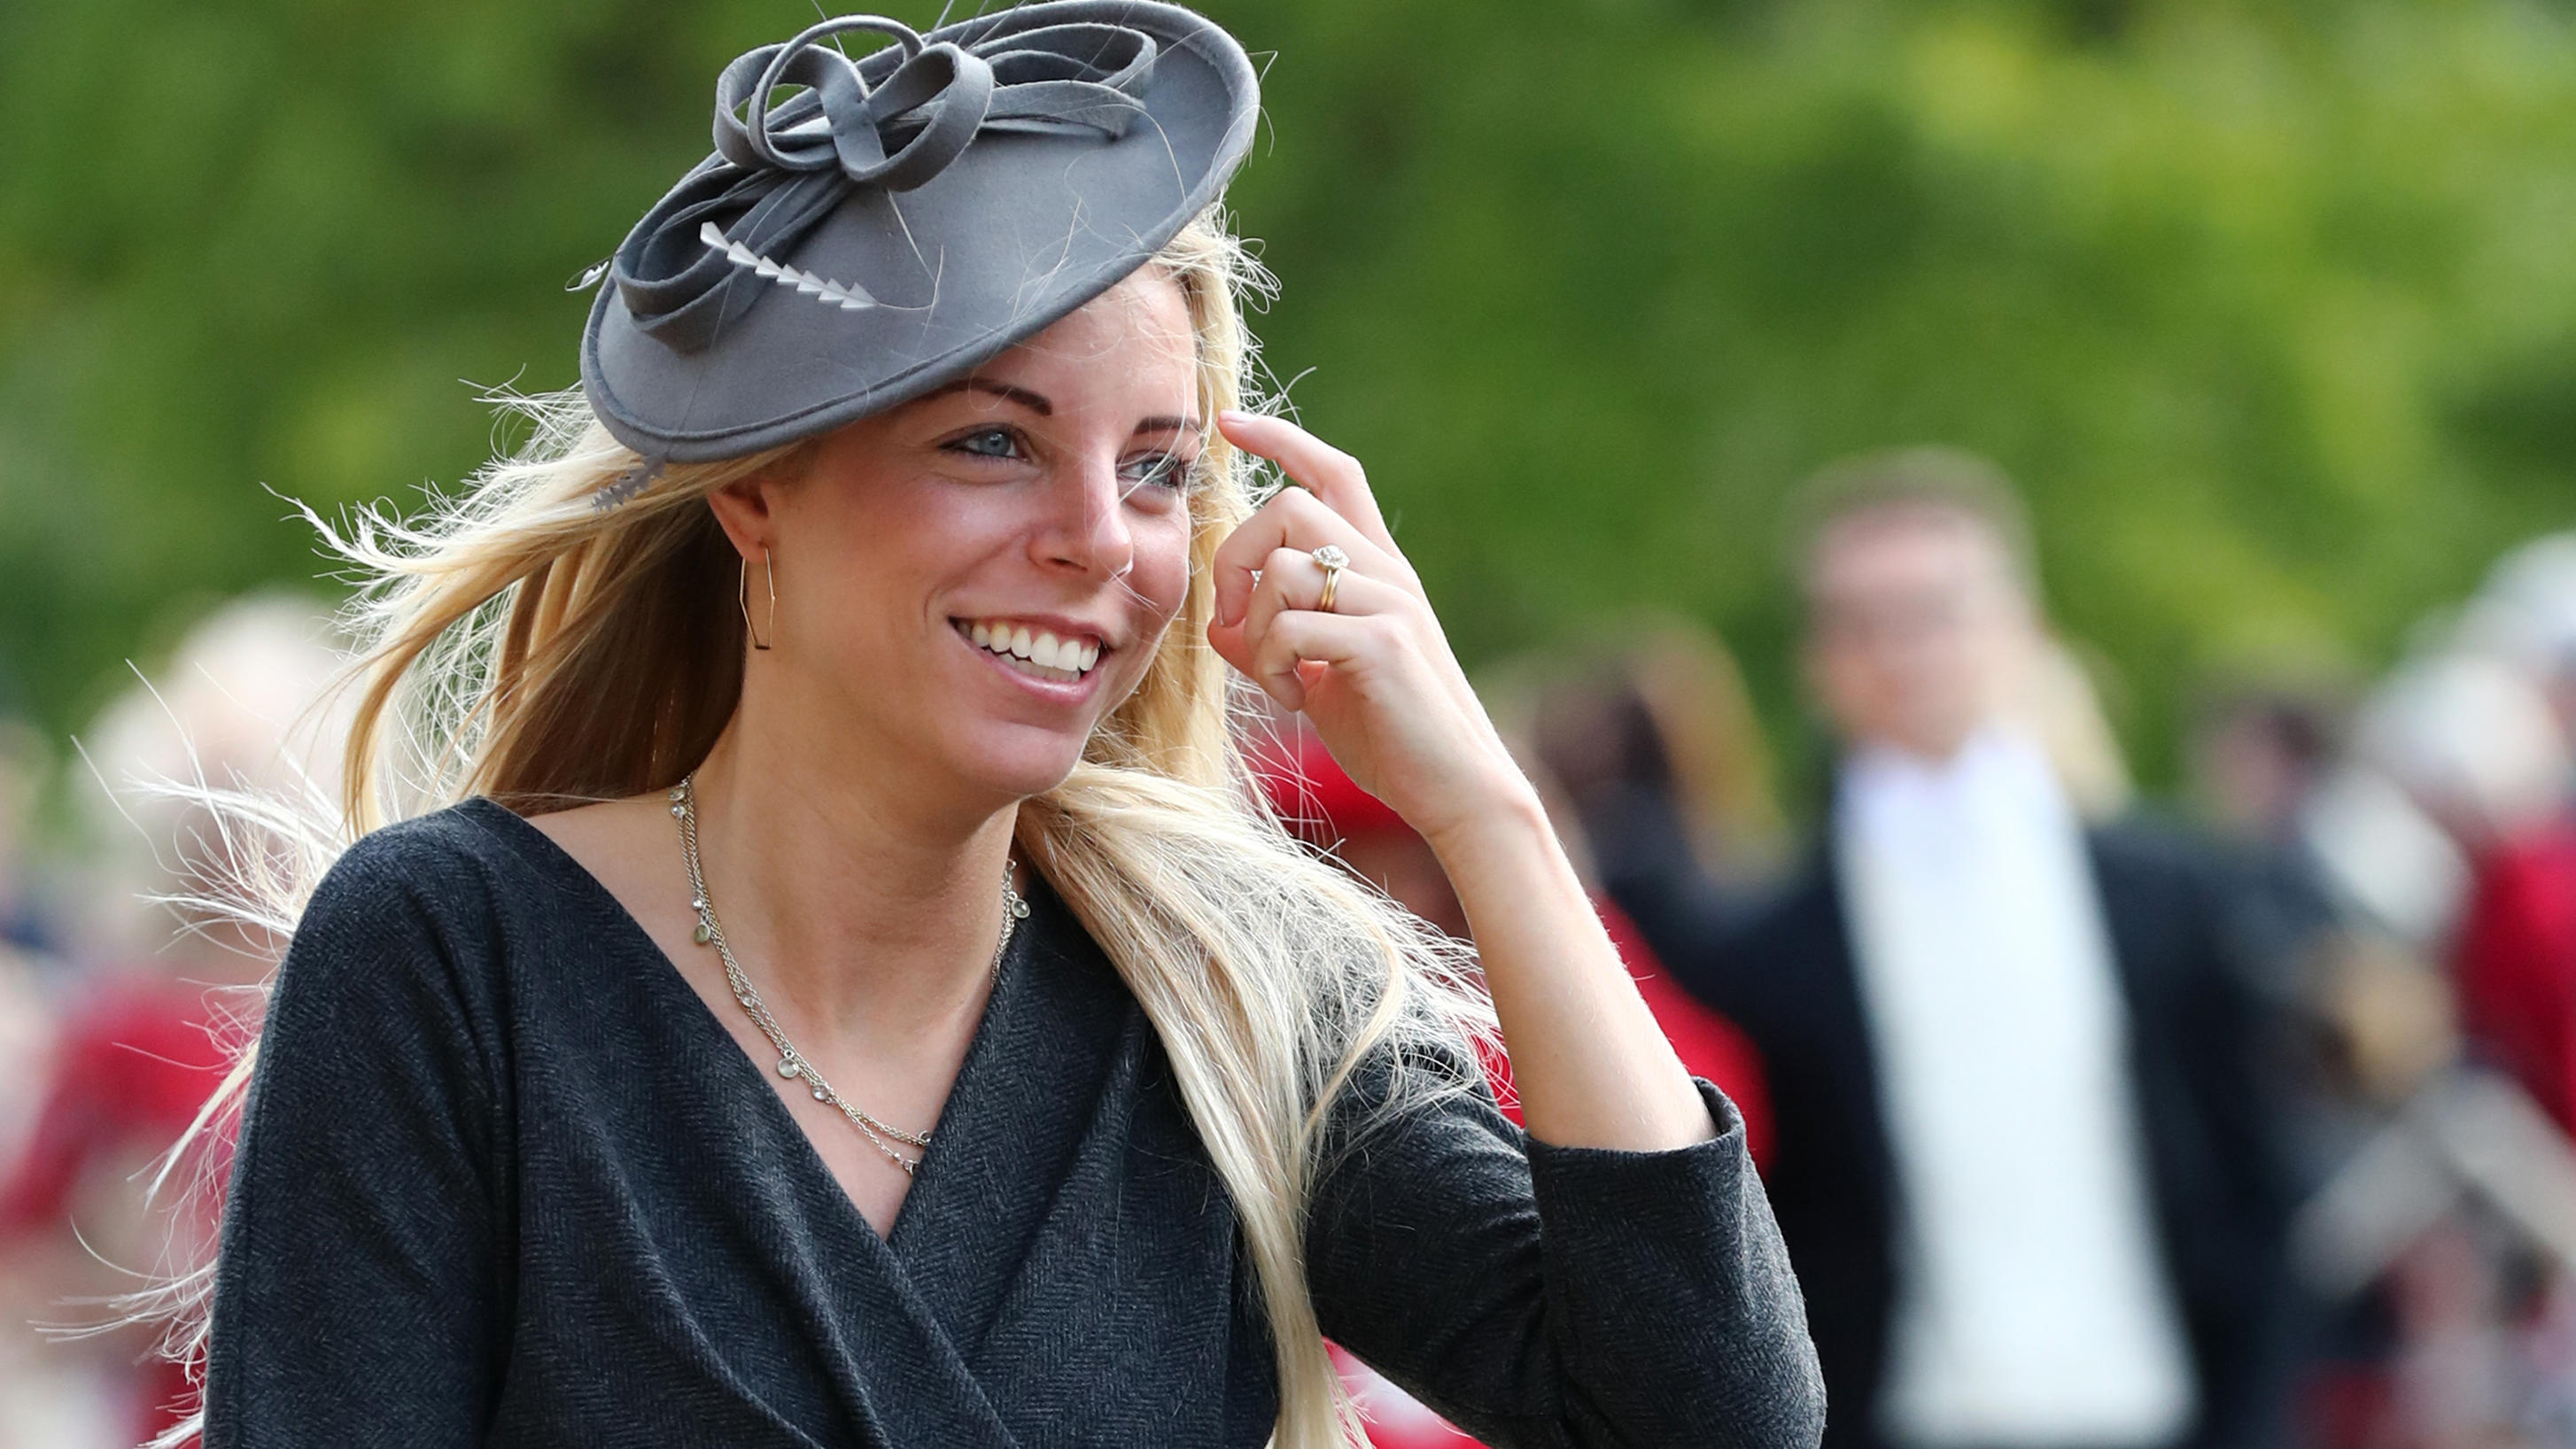 Chelsy Davy arrives ahead of the wedding of Princess Eugenie to Jack Brooksbank at St George's Chapel in Windsor Castle